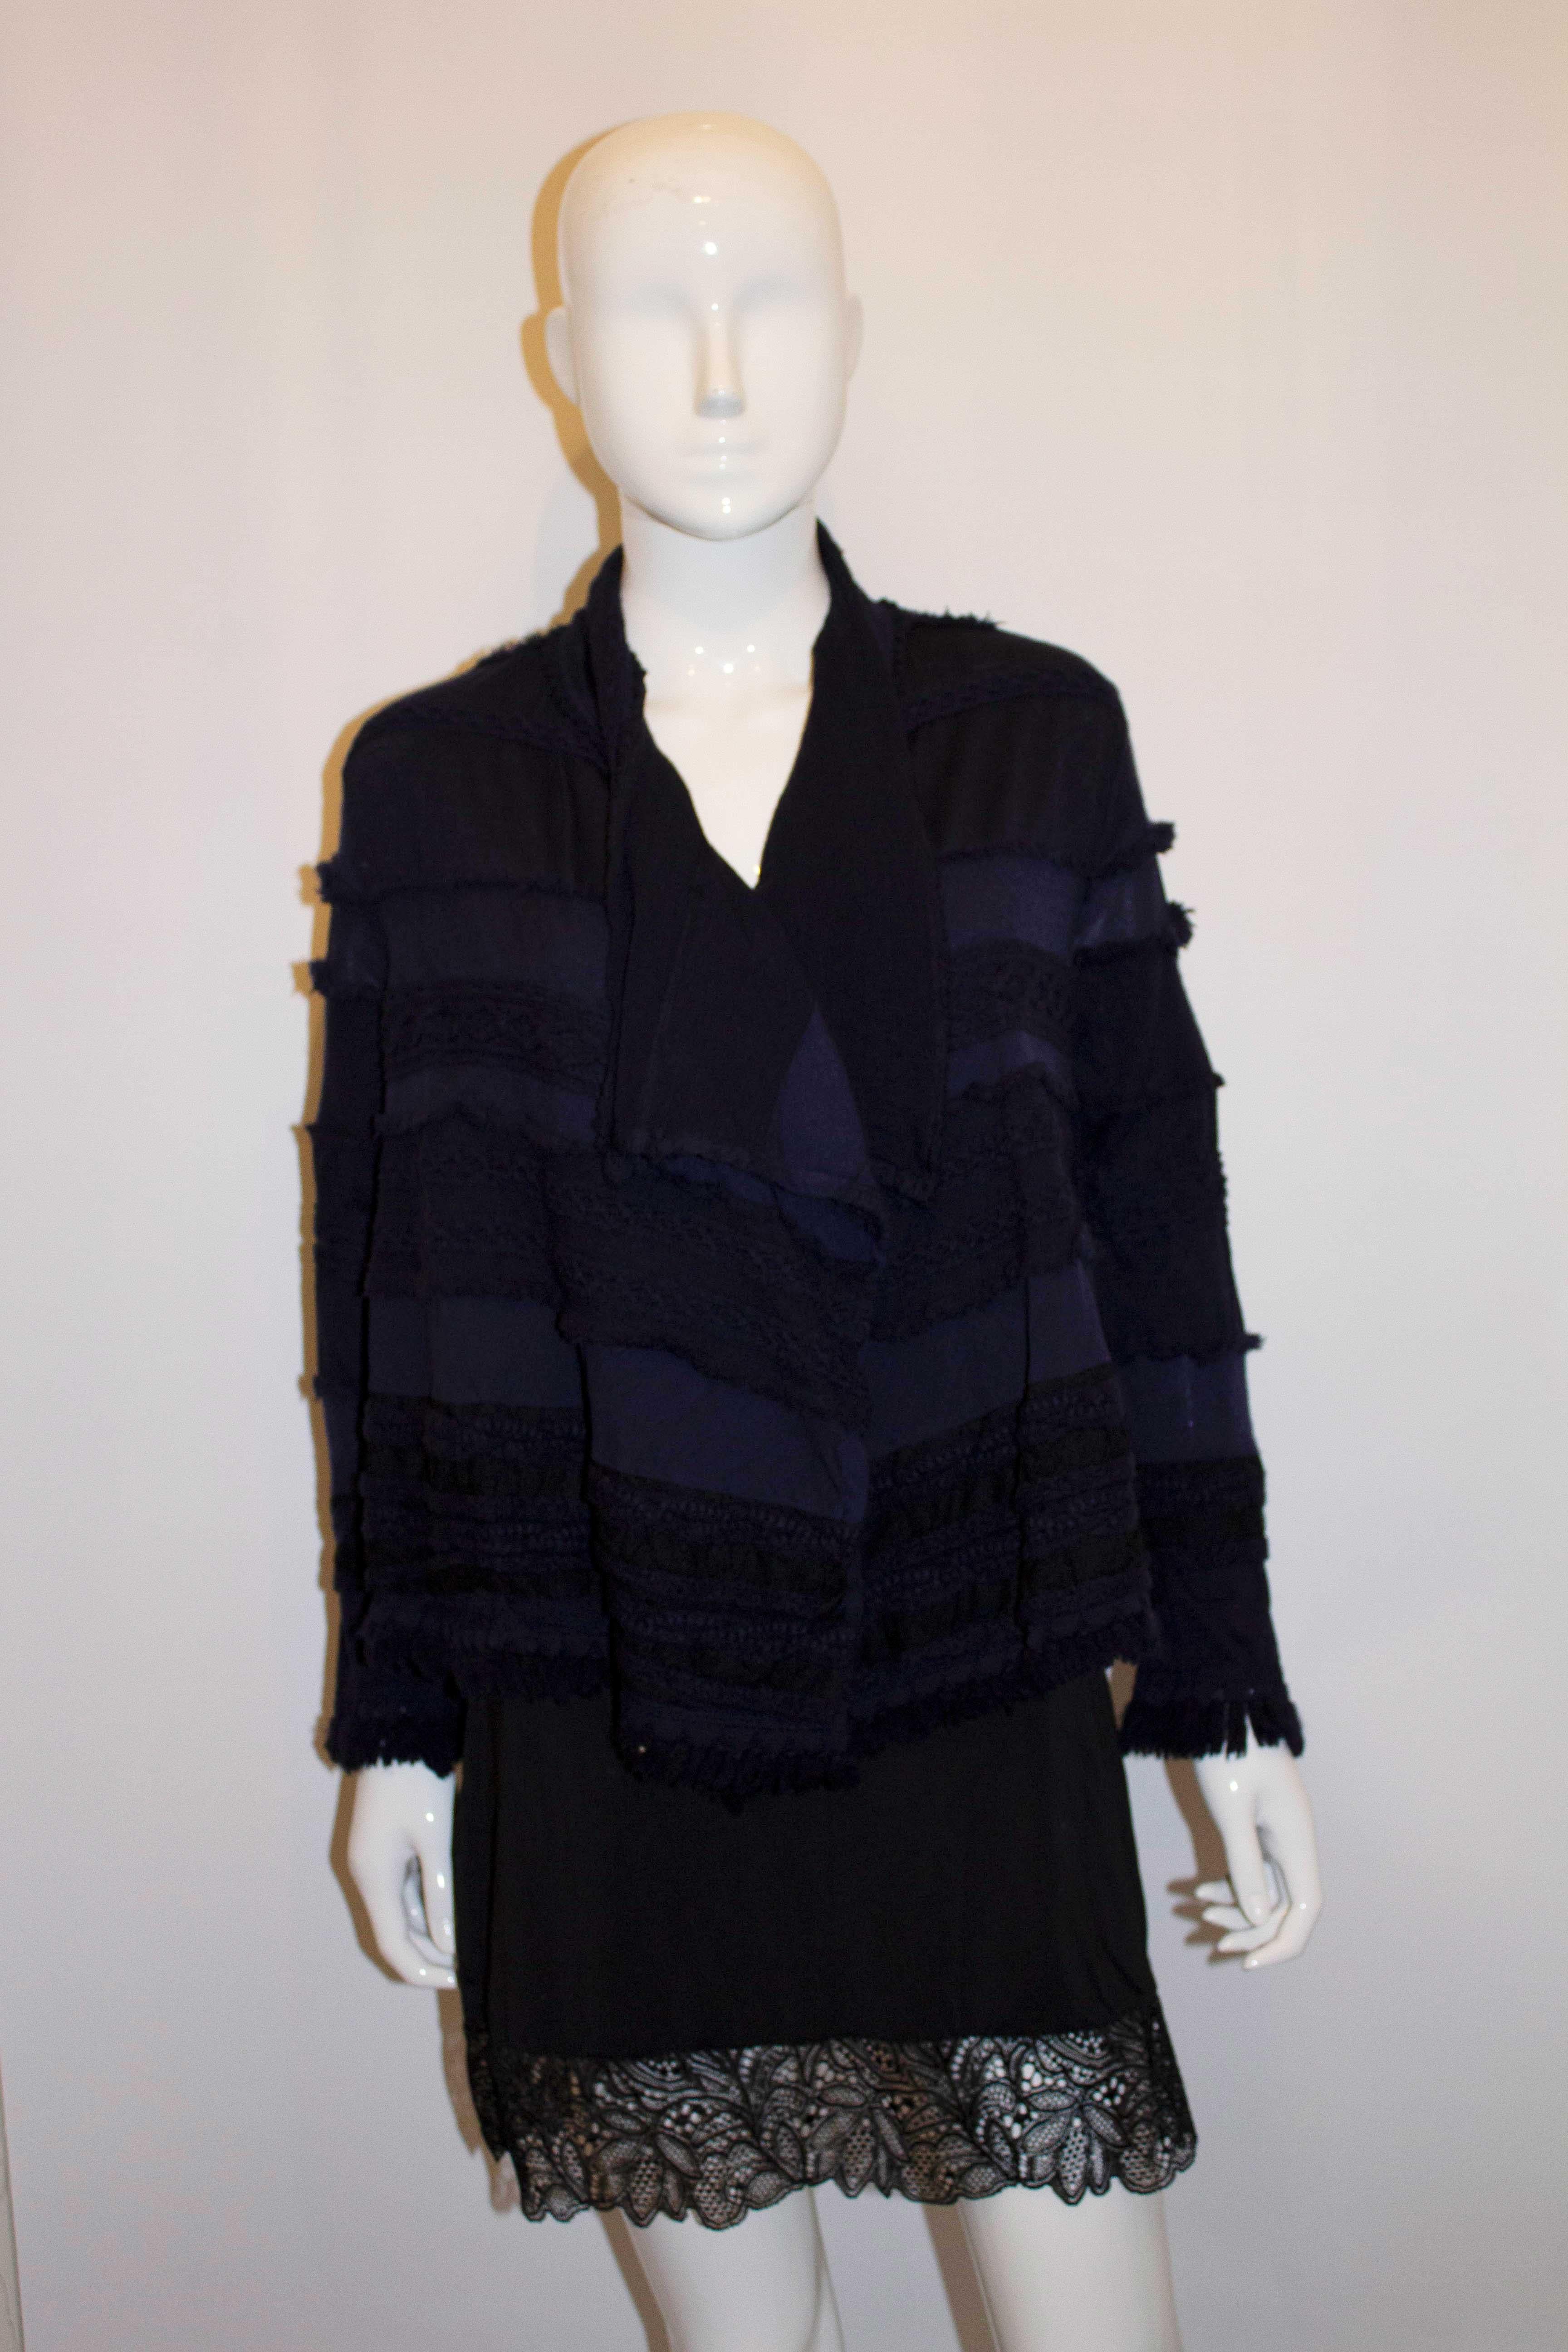 An easy to wear wool jacket by Miyake Hatat line. The sleaves and hem have a fringe trim and the fabric has braid and other decorations. The jacket is in a dark ink blue /black colour , and is unlined. Size 2 Measurements : Bust up to 39'', length